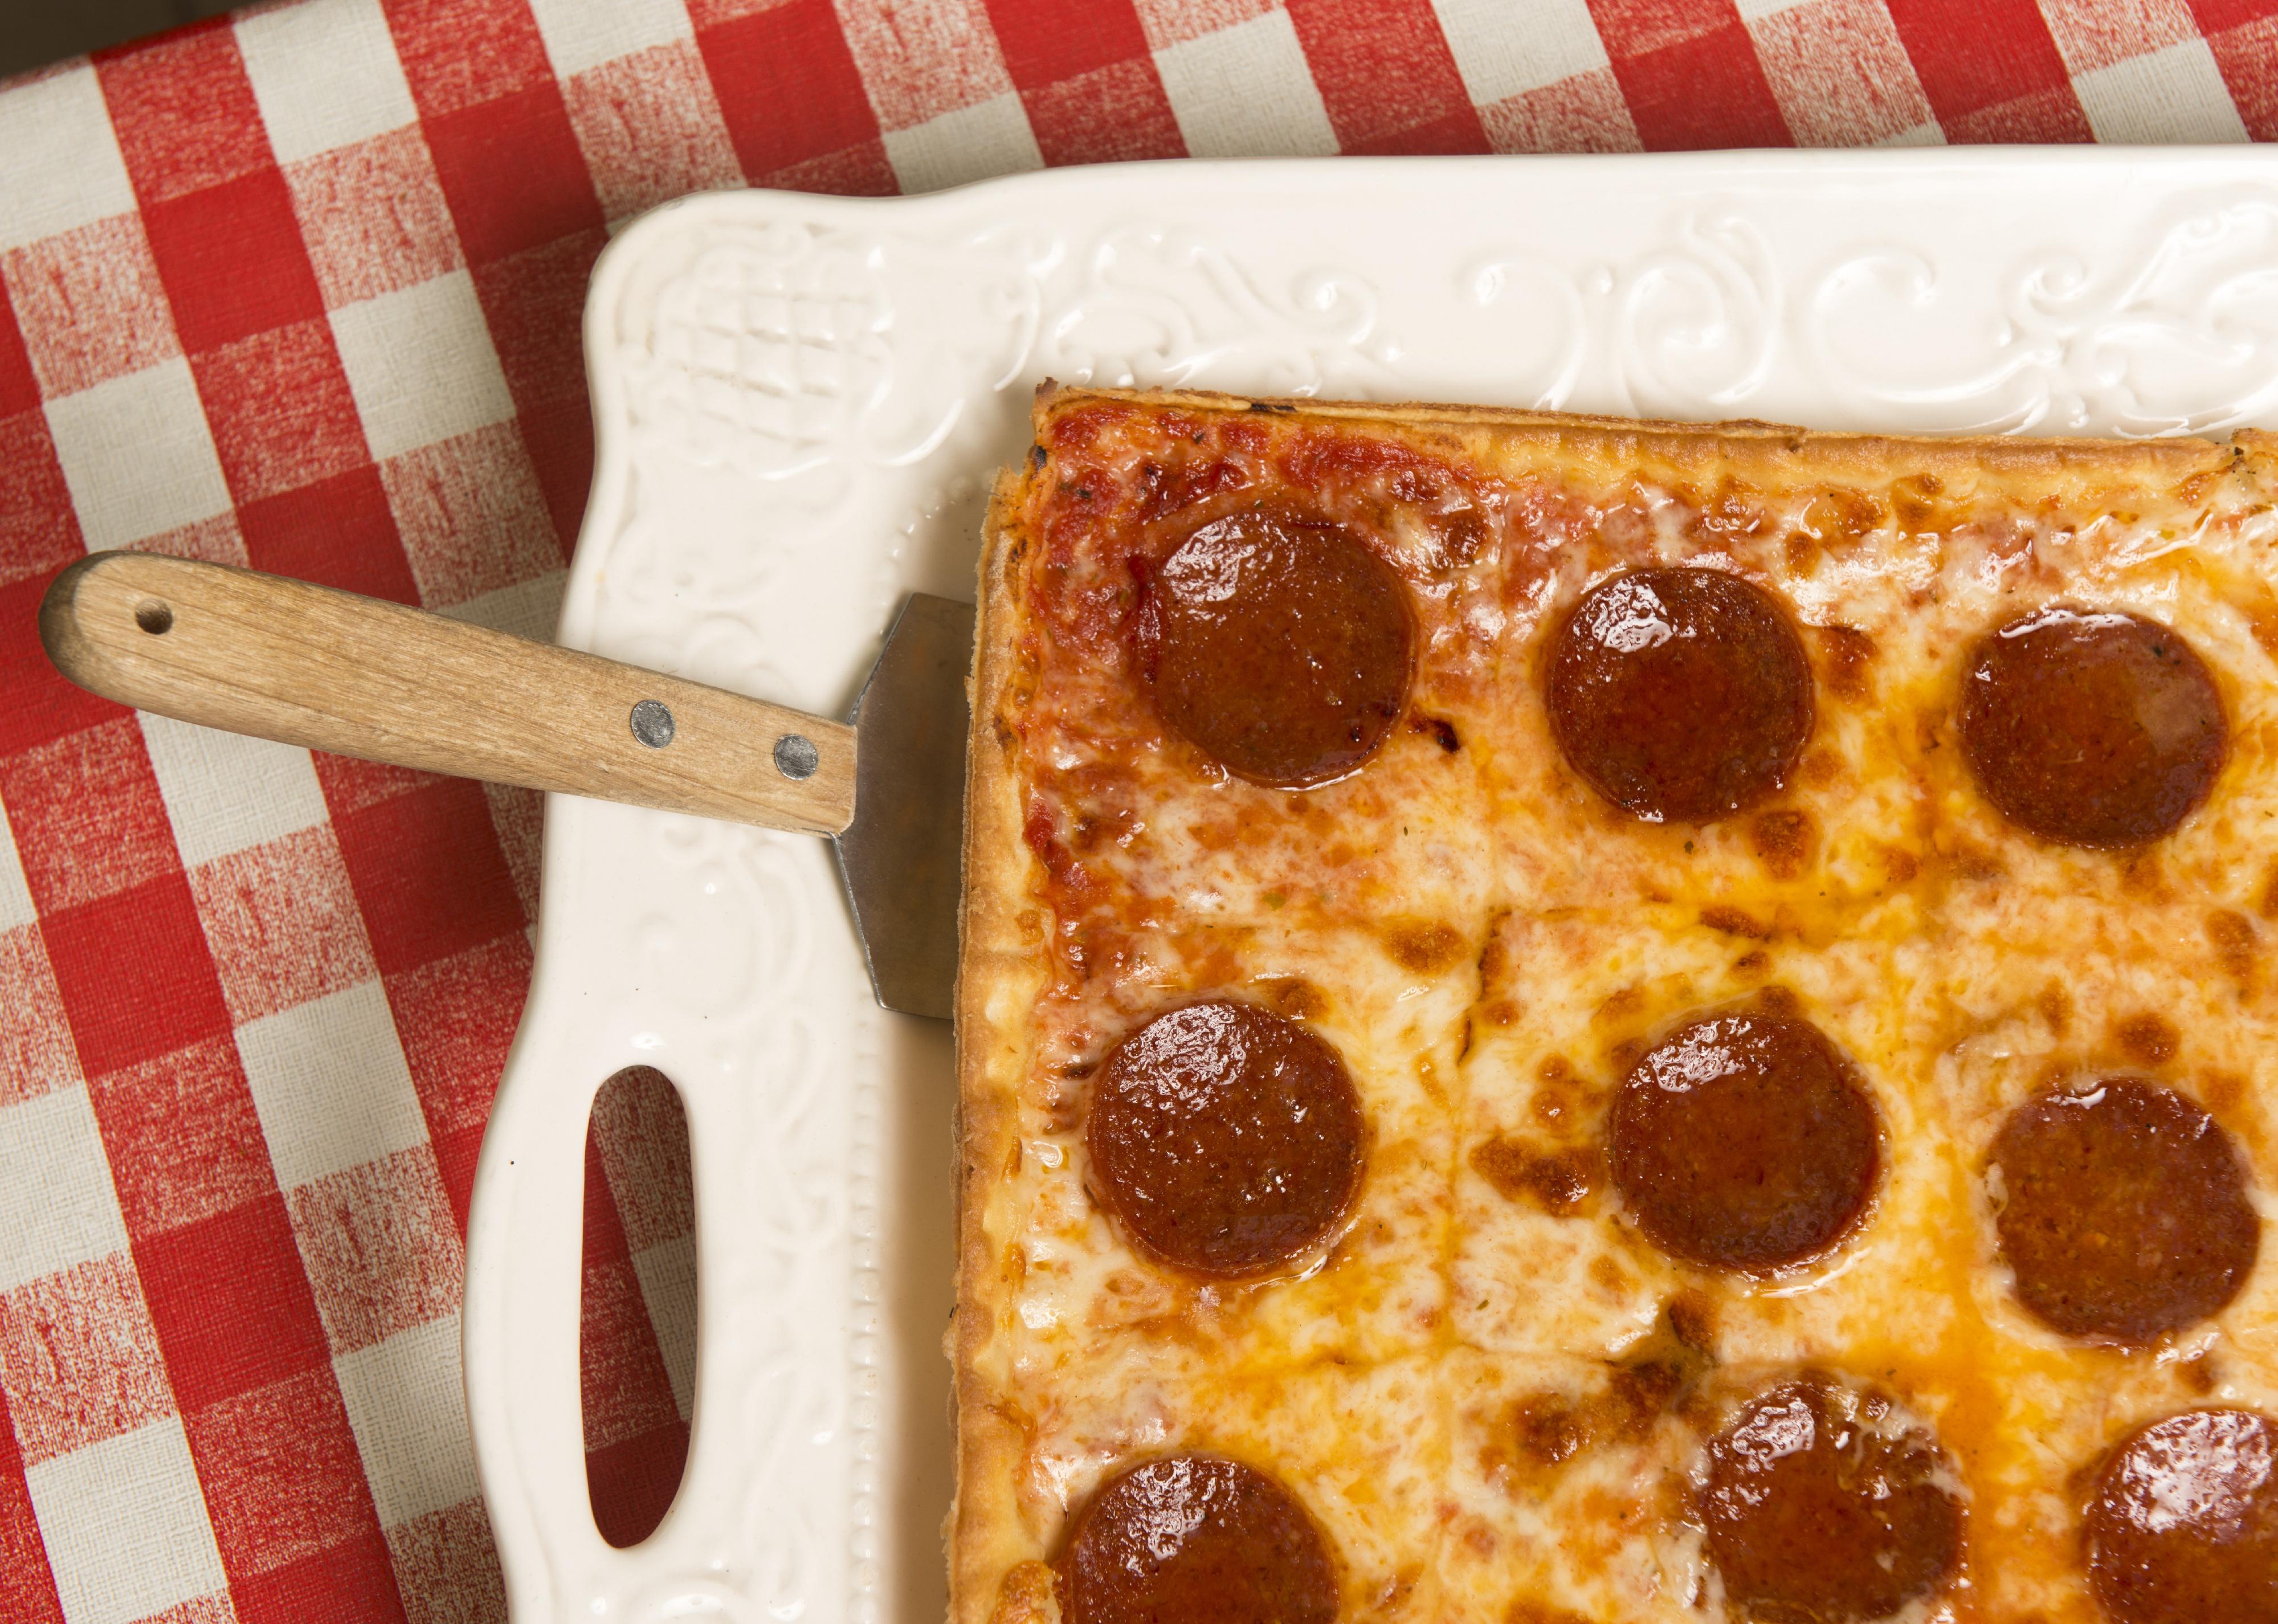 A rectangular pepperoni pizza on a red checkered table.